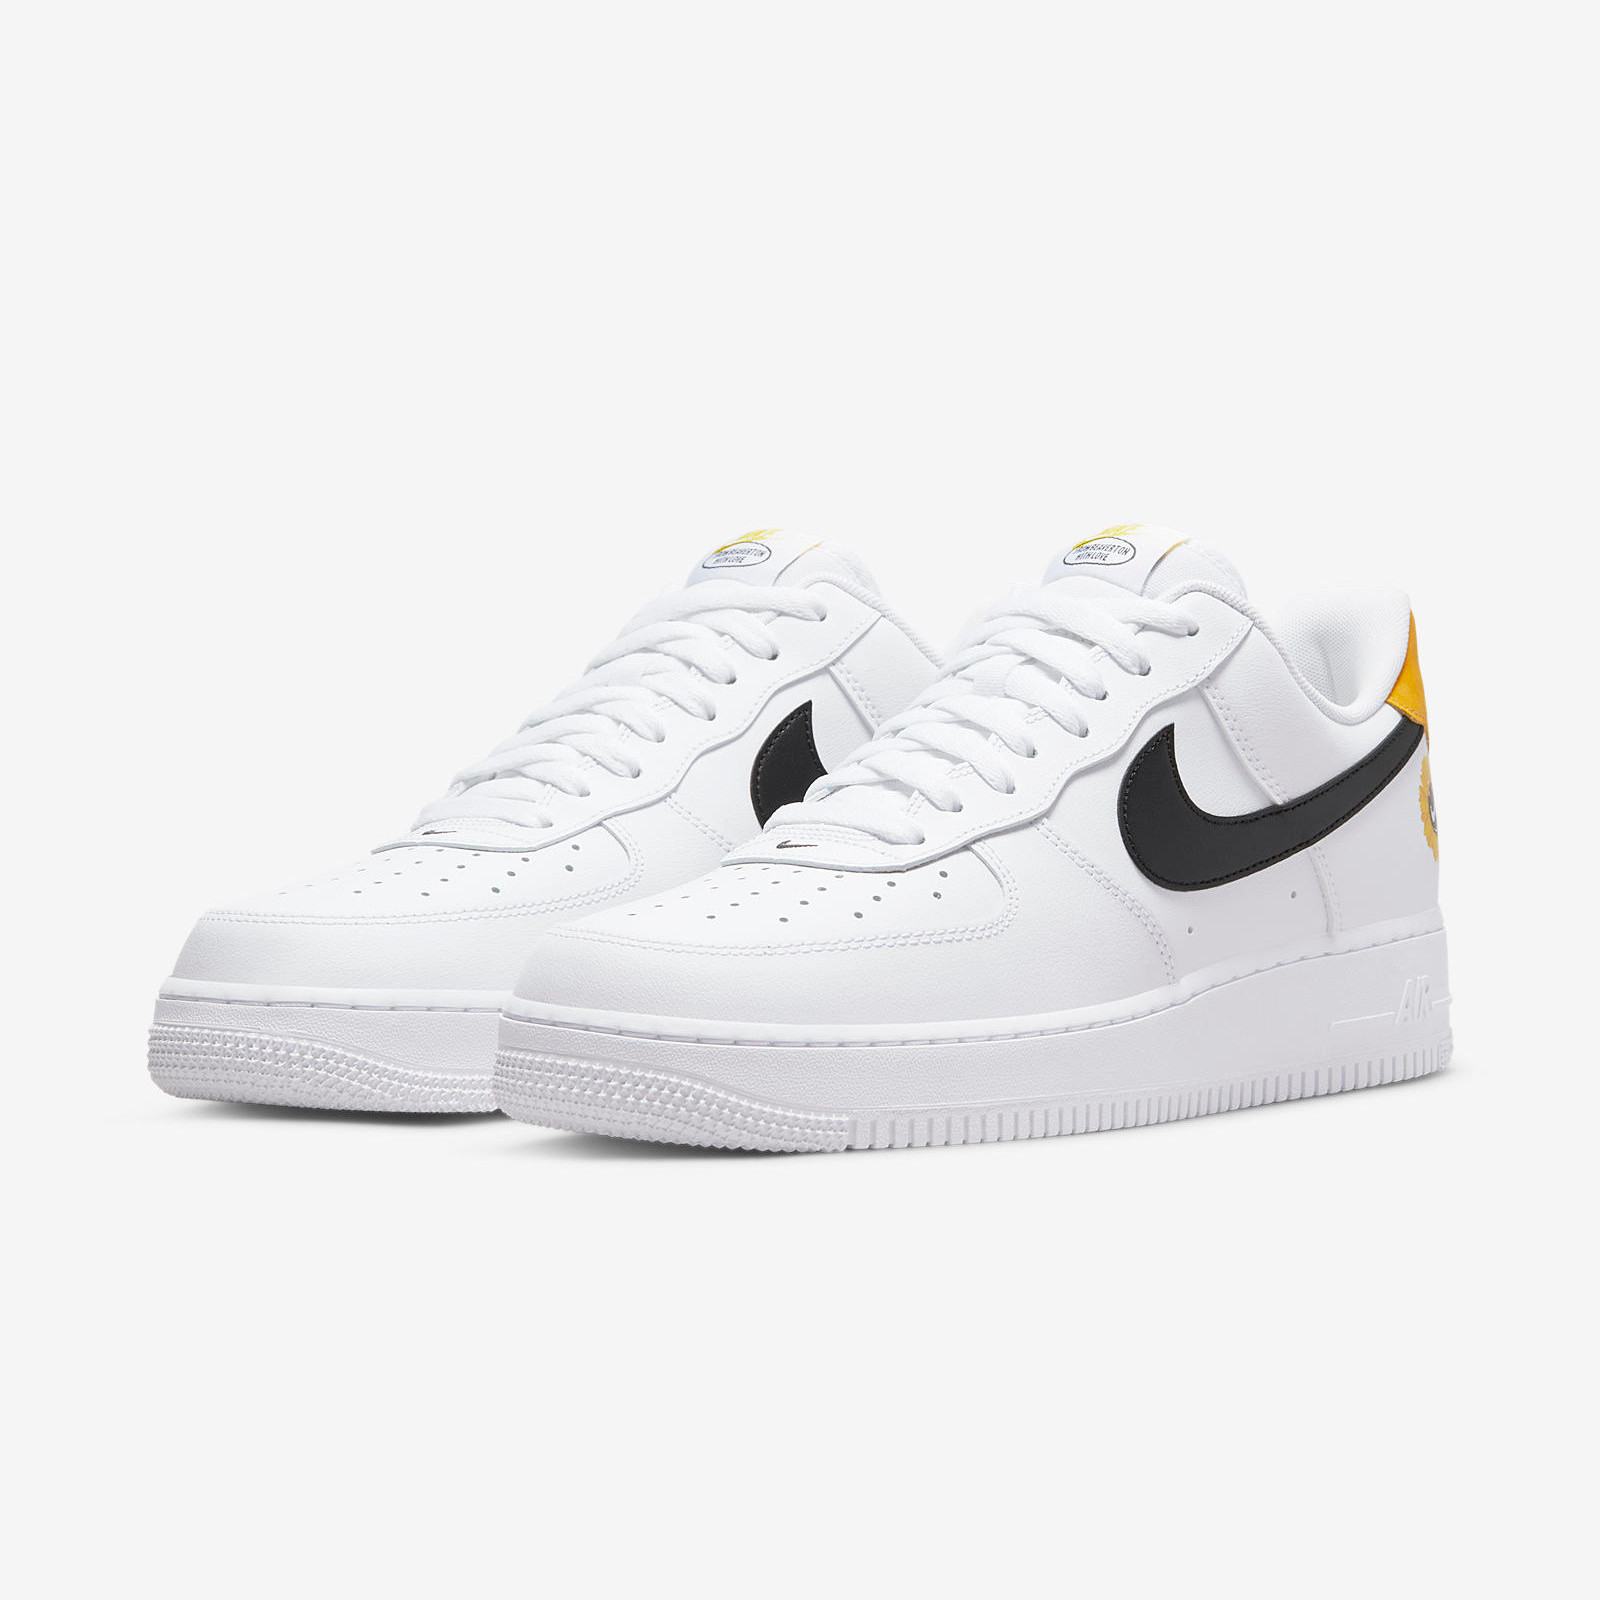 Nike Air Force 1 Low
« Have A Nike Day »